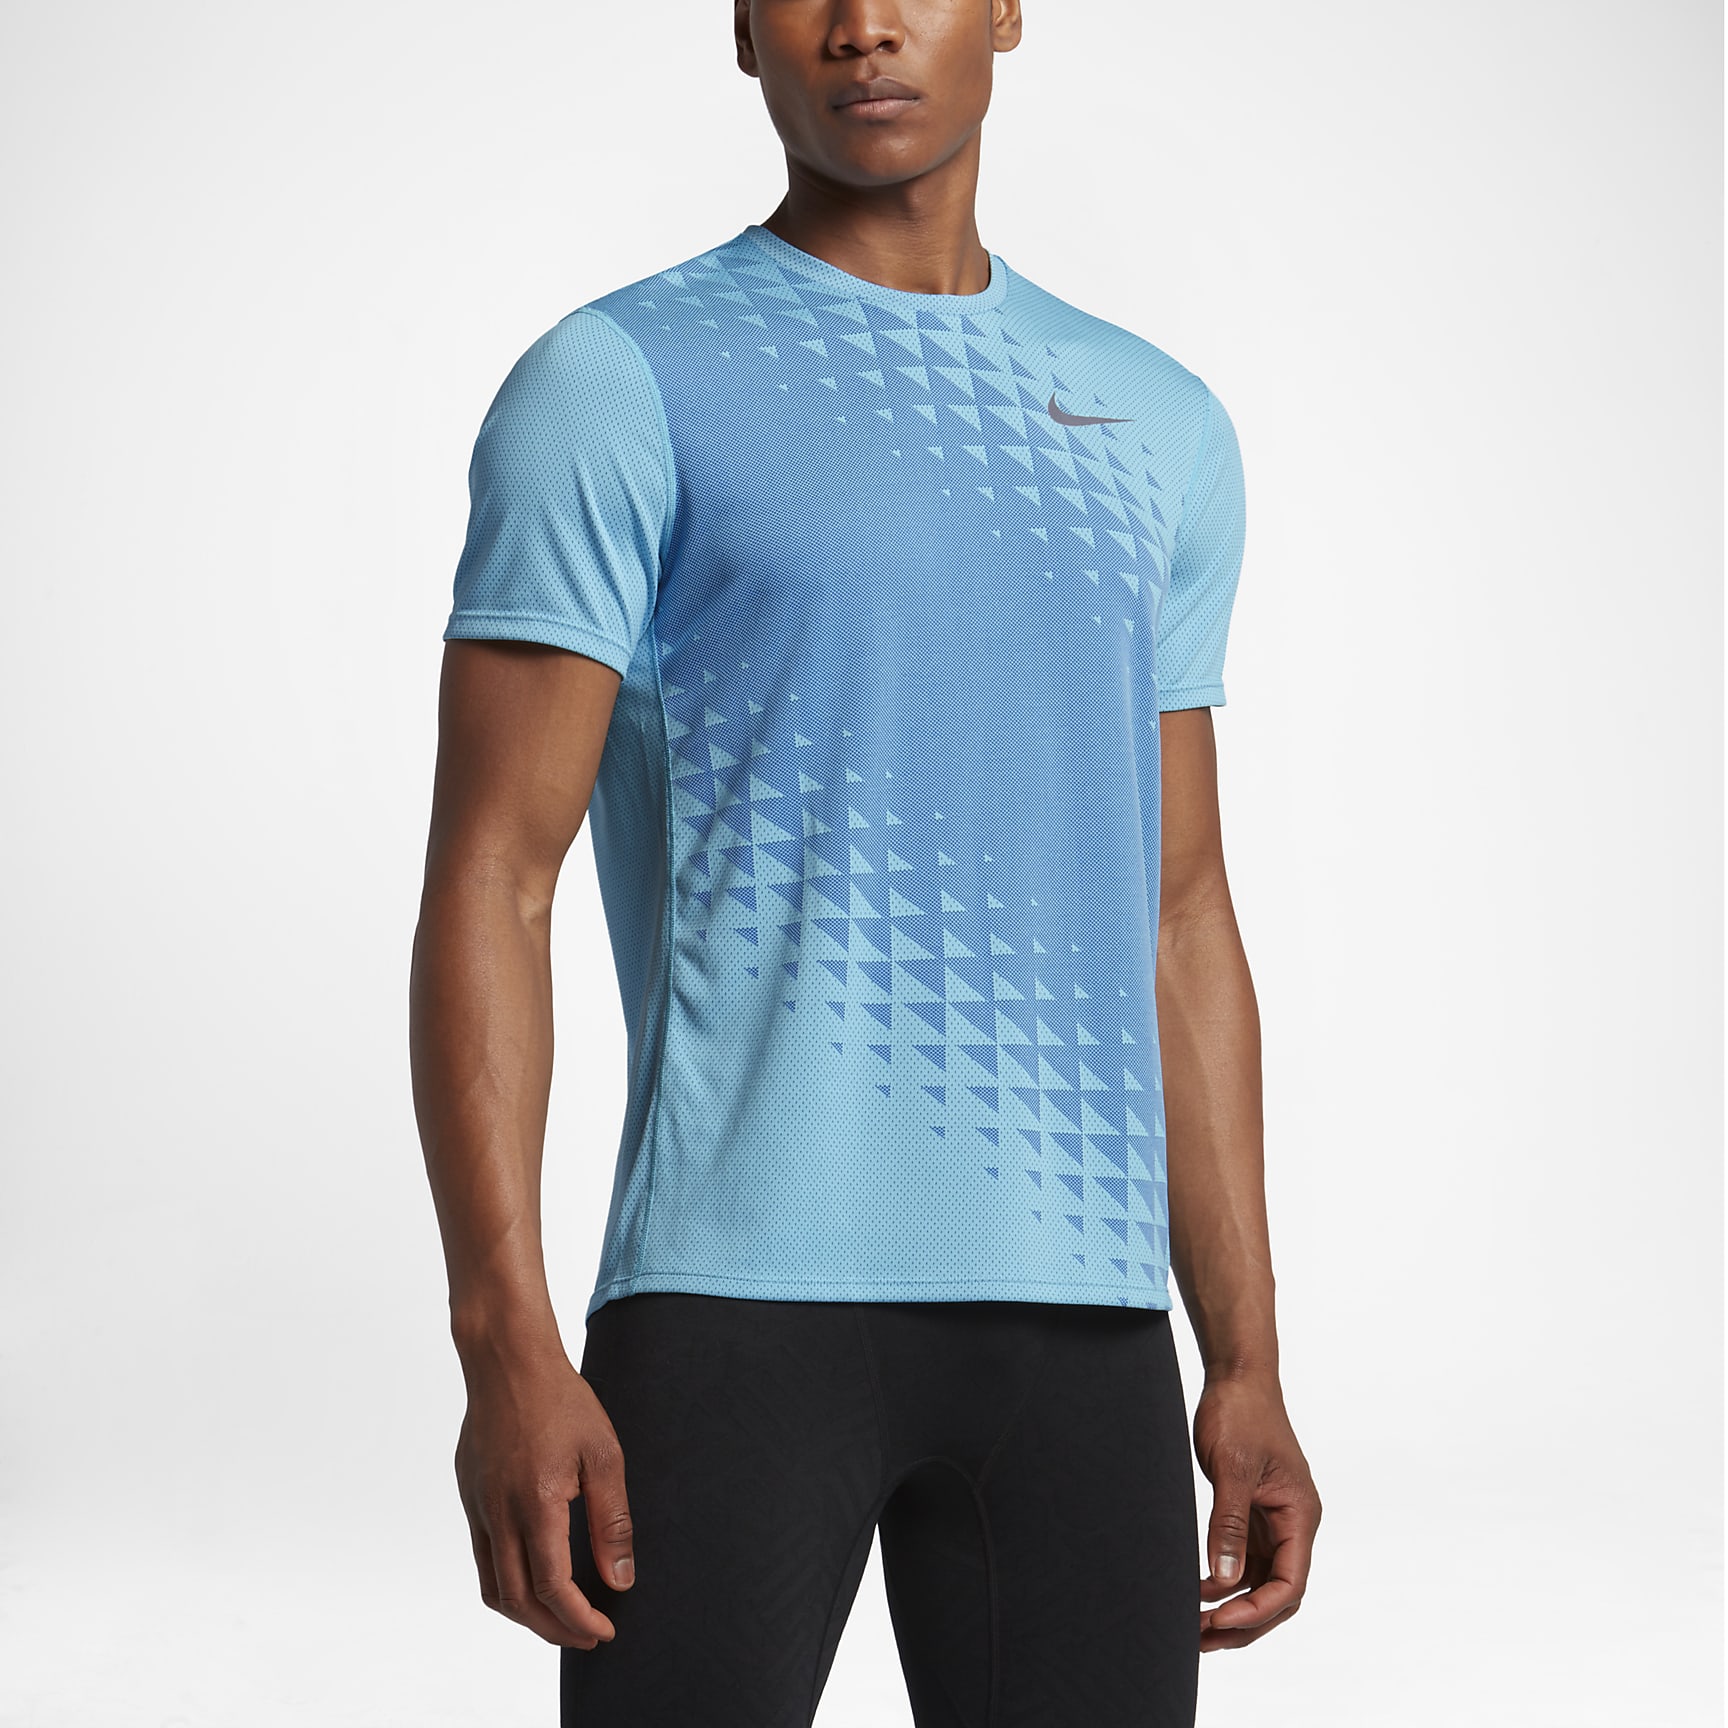 Nike Zonal Cooling Relay Graphic Men's Short-Sleeve Running Top. Nike IN